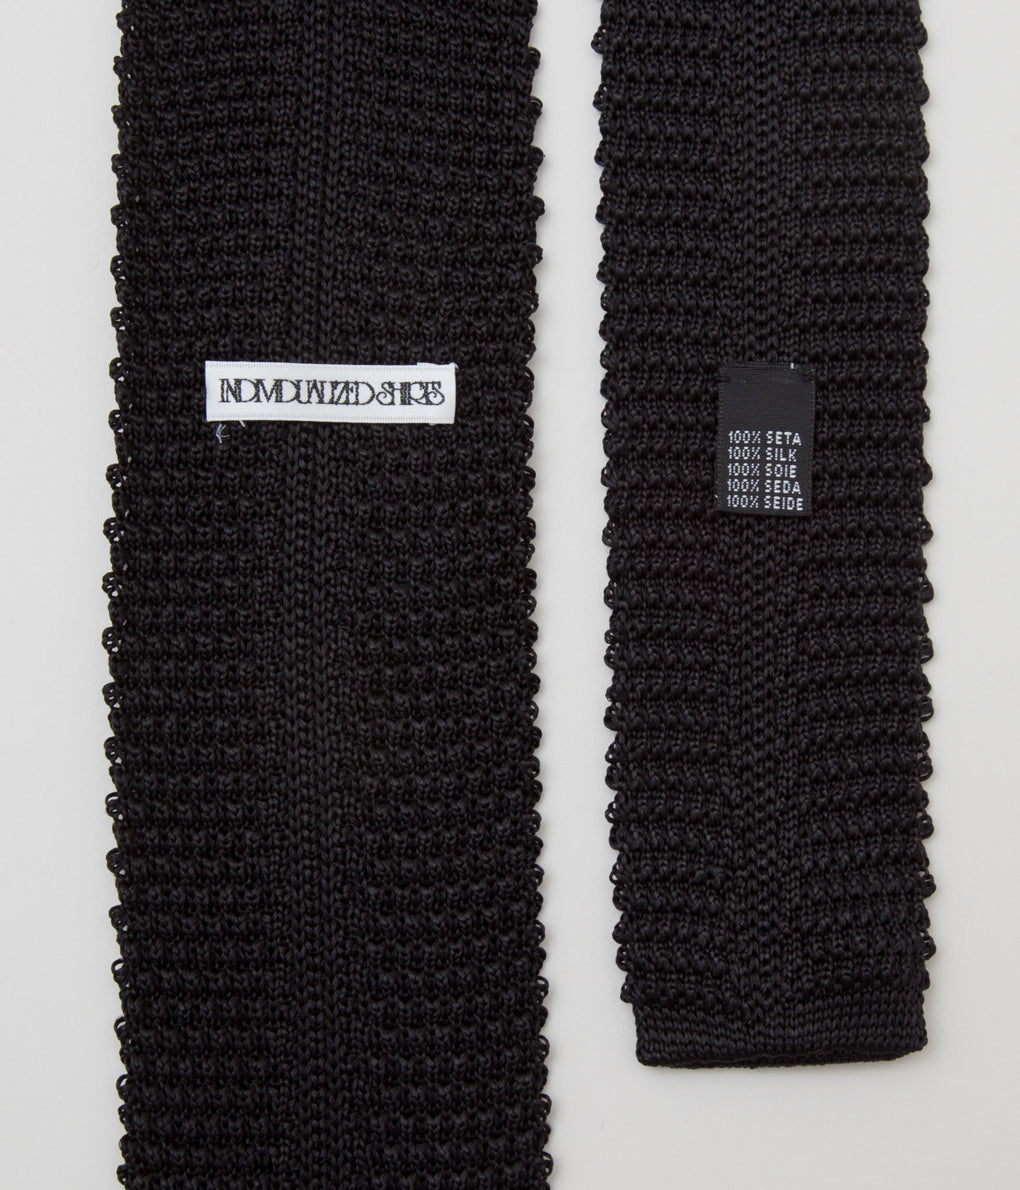 INDIVIDUALIZED ACCESSORIES "KNIT TIE" (BLACK)